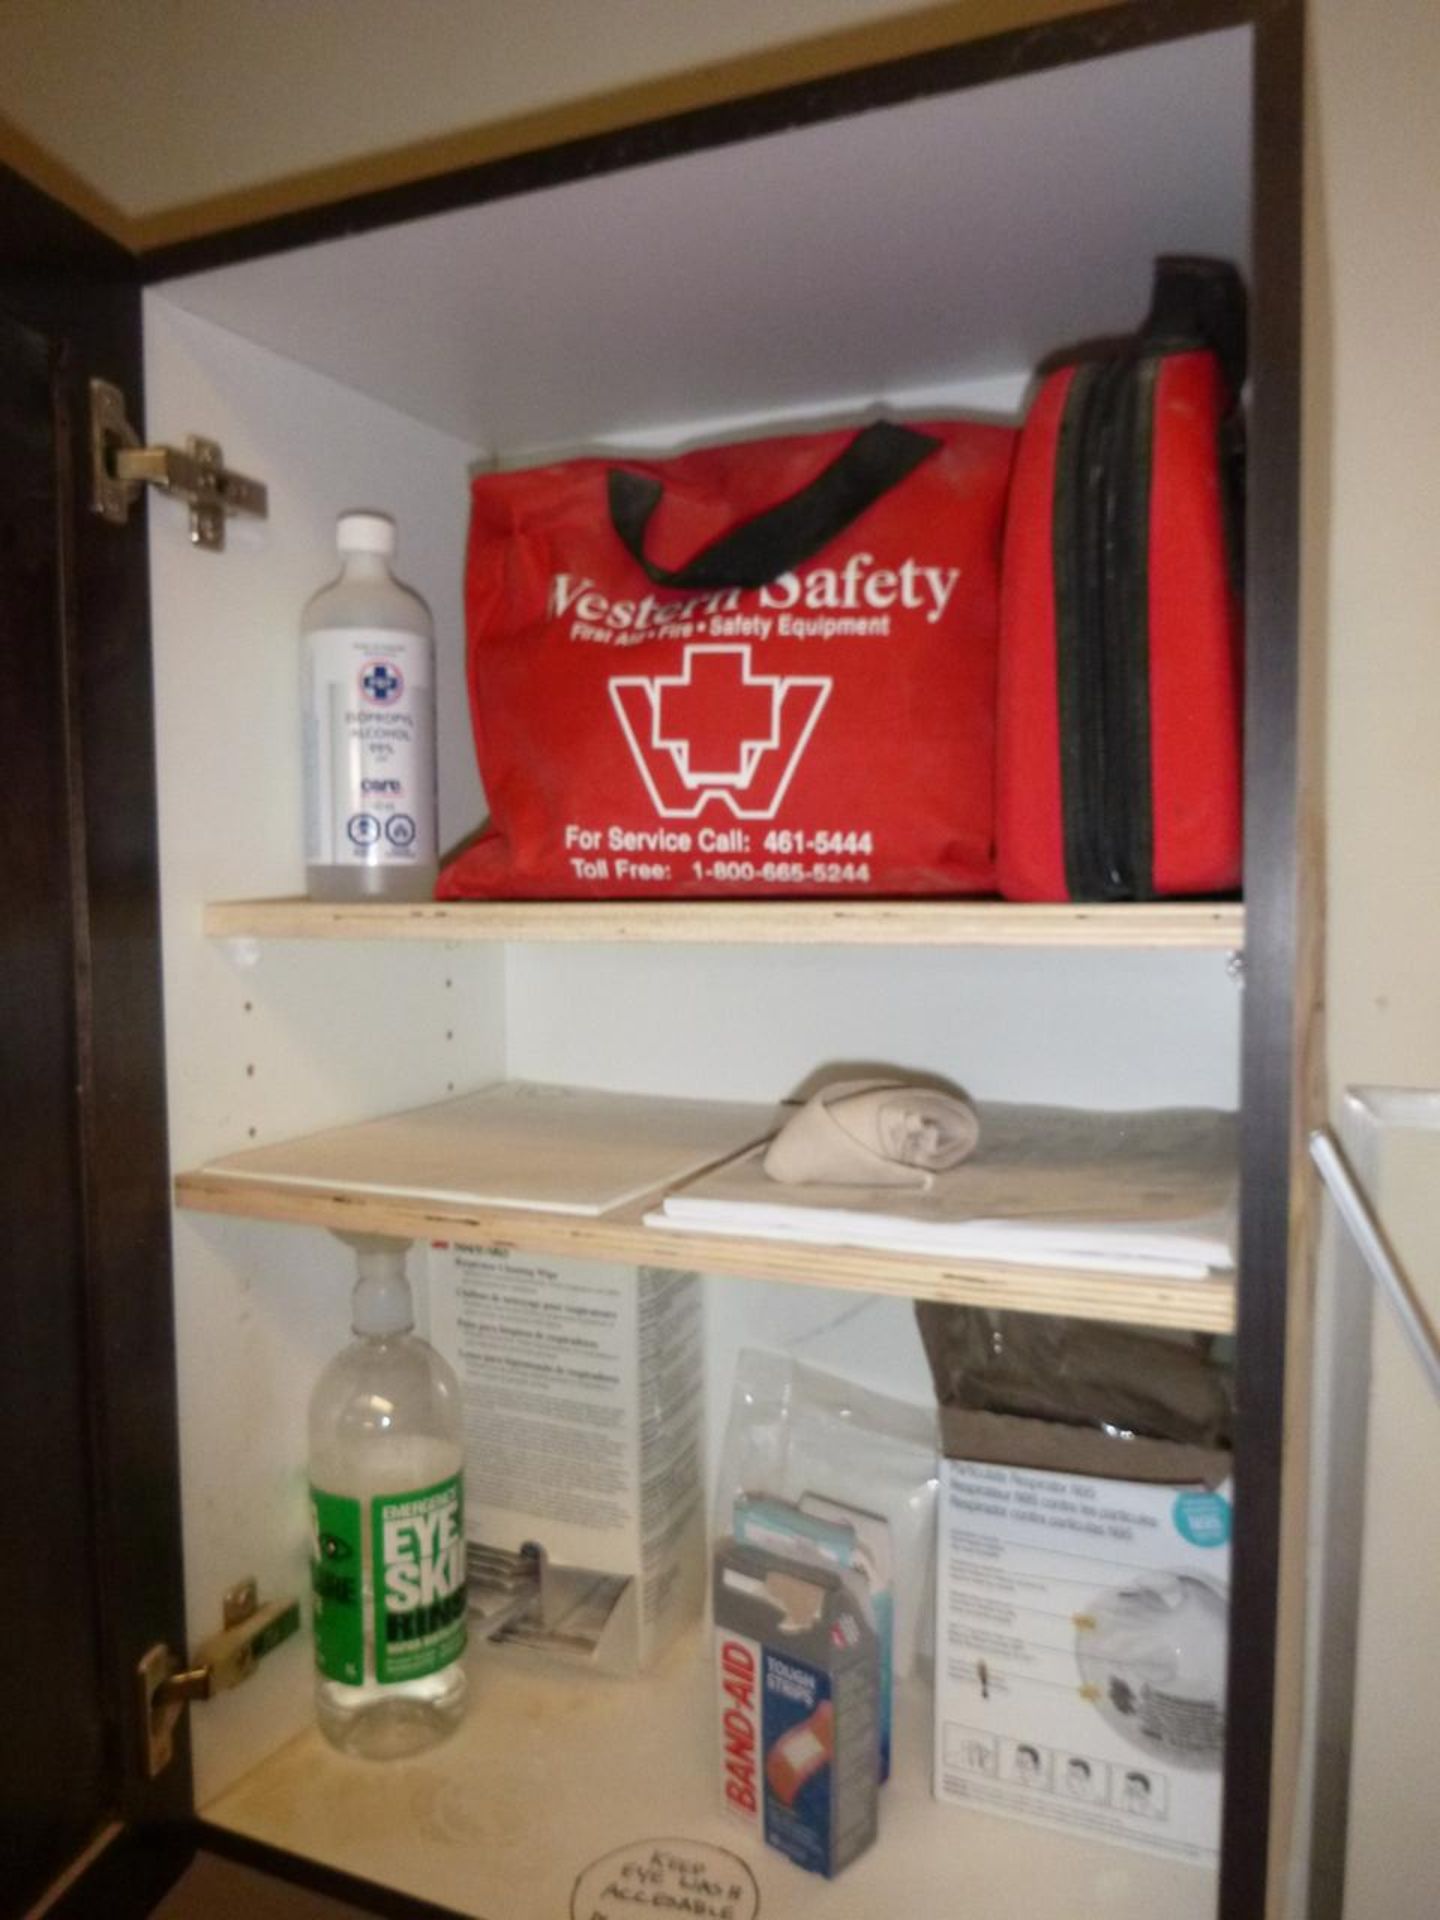 First aid cabinet and contents - Image 2 of 2